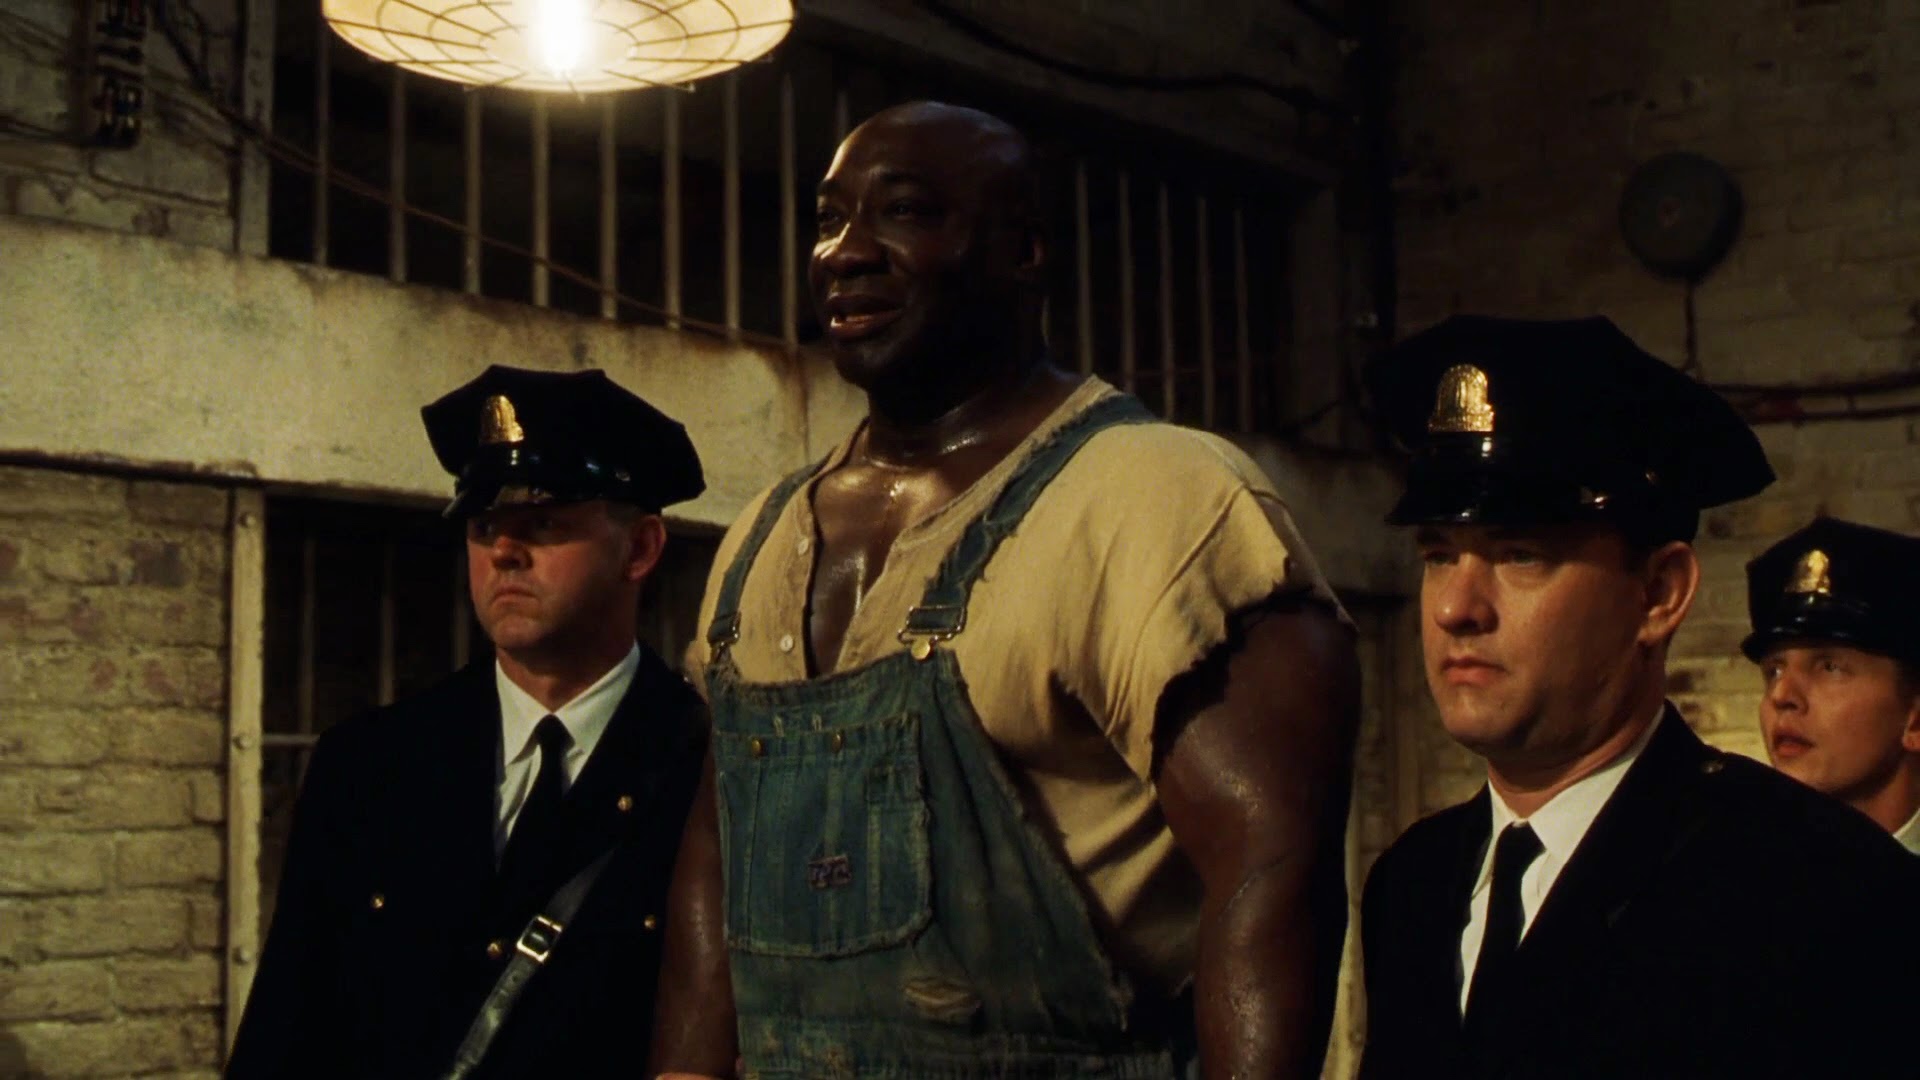 green mile putlocker They replaced the garden shoes shown next to them. dis...